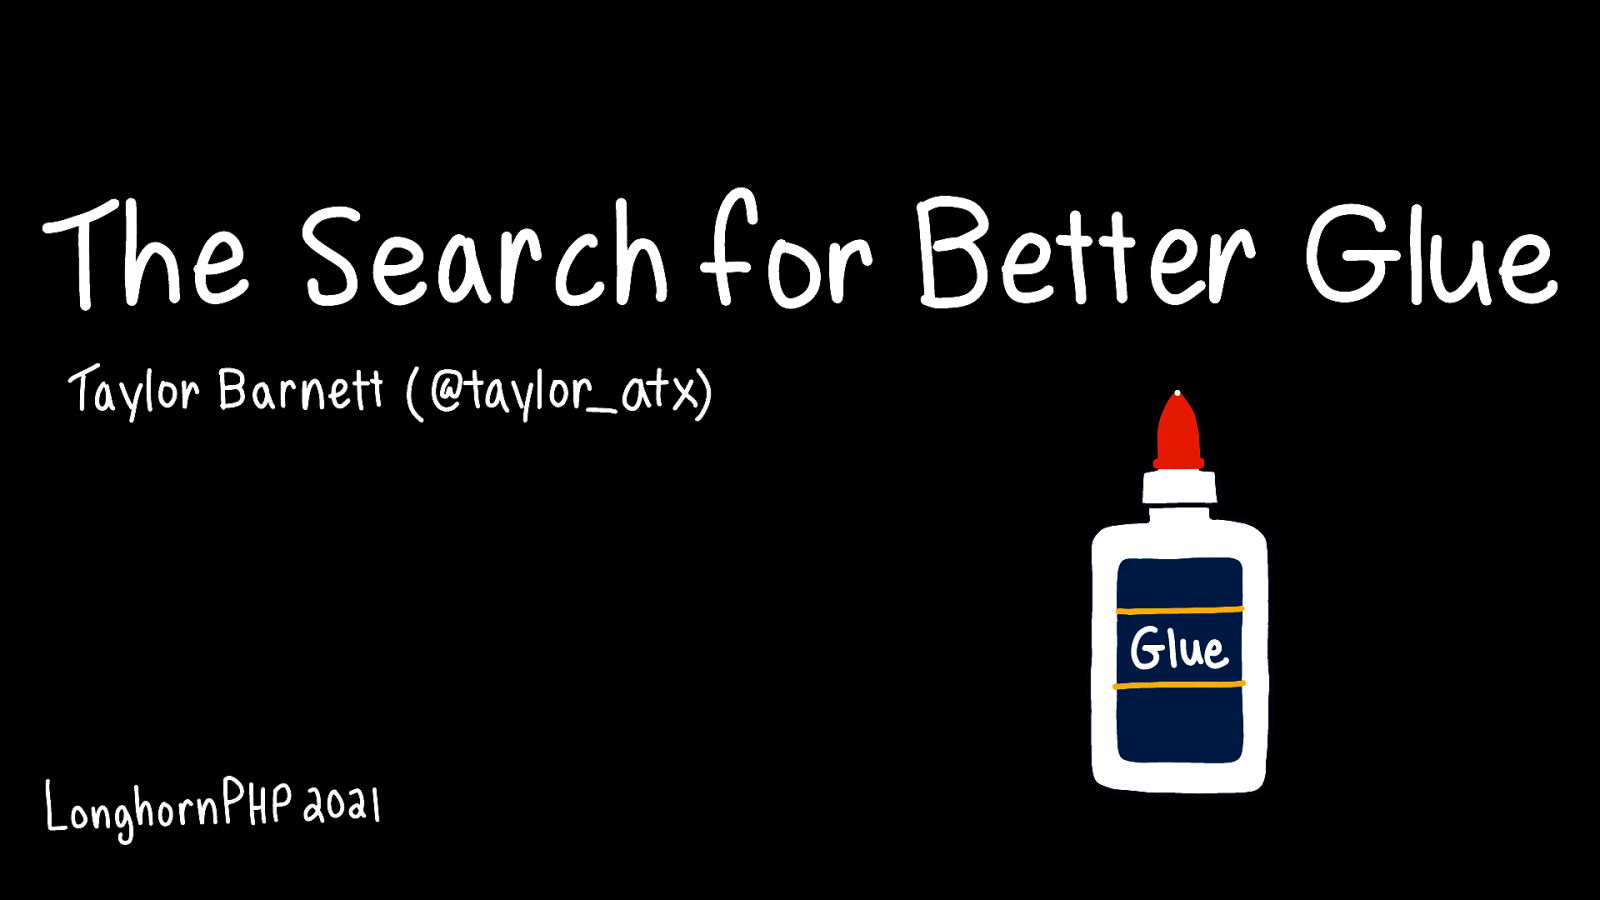 Keynote: The Search for Better Glue